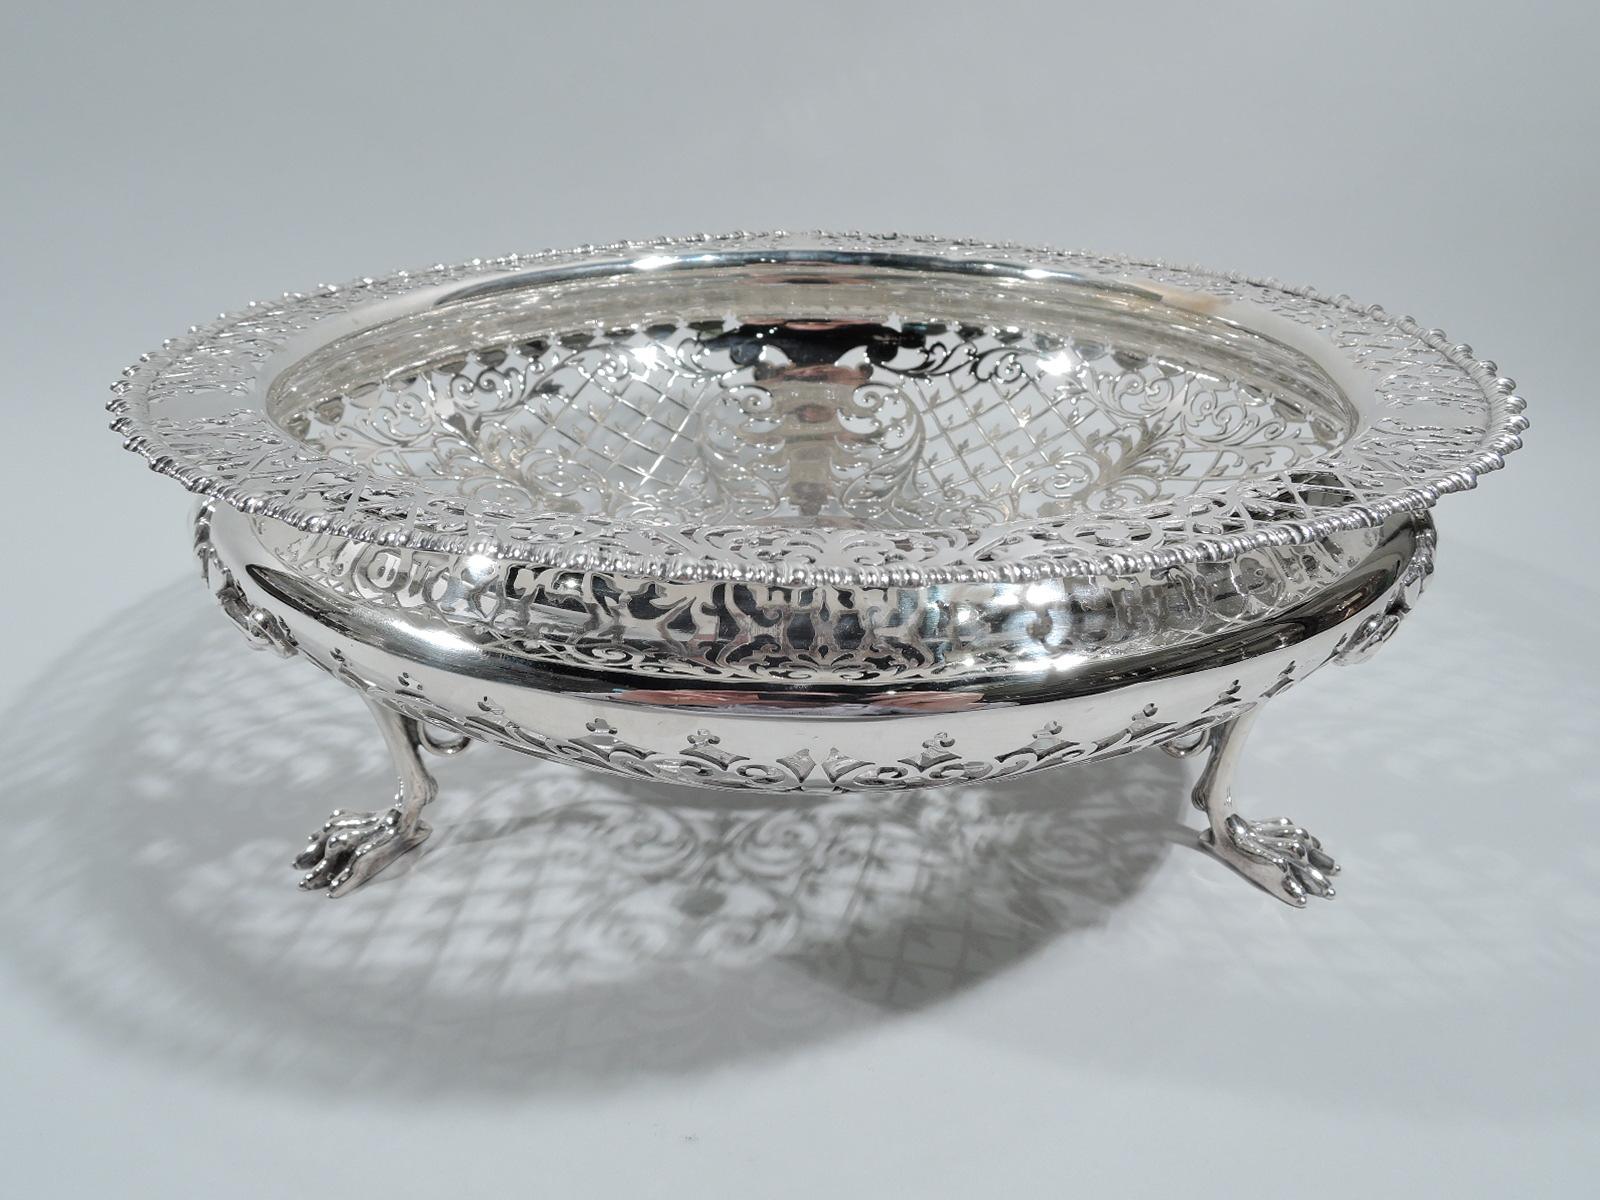 Edwardian sterling silver bowl. Made by Goldsmiths & Silversmiths Co. Ltd in London in 1905. Bellied with flat shoulder and gadrooned rim. Three leaf and scroll-mounted talon supports. Well circular and solid (vacant). Solid leafy ornament in open